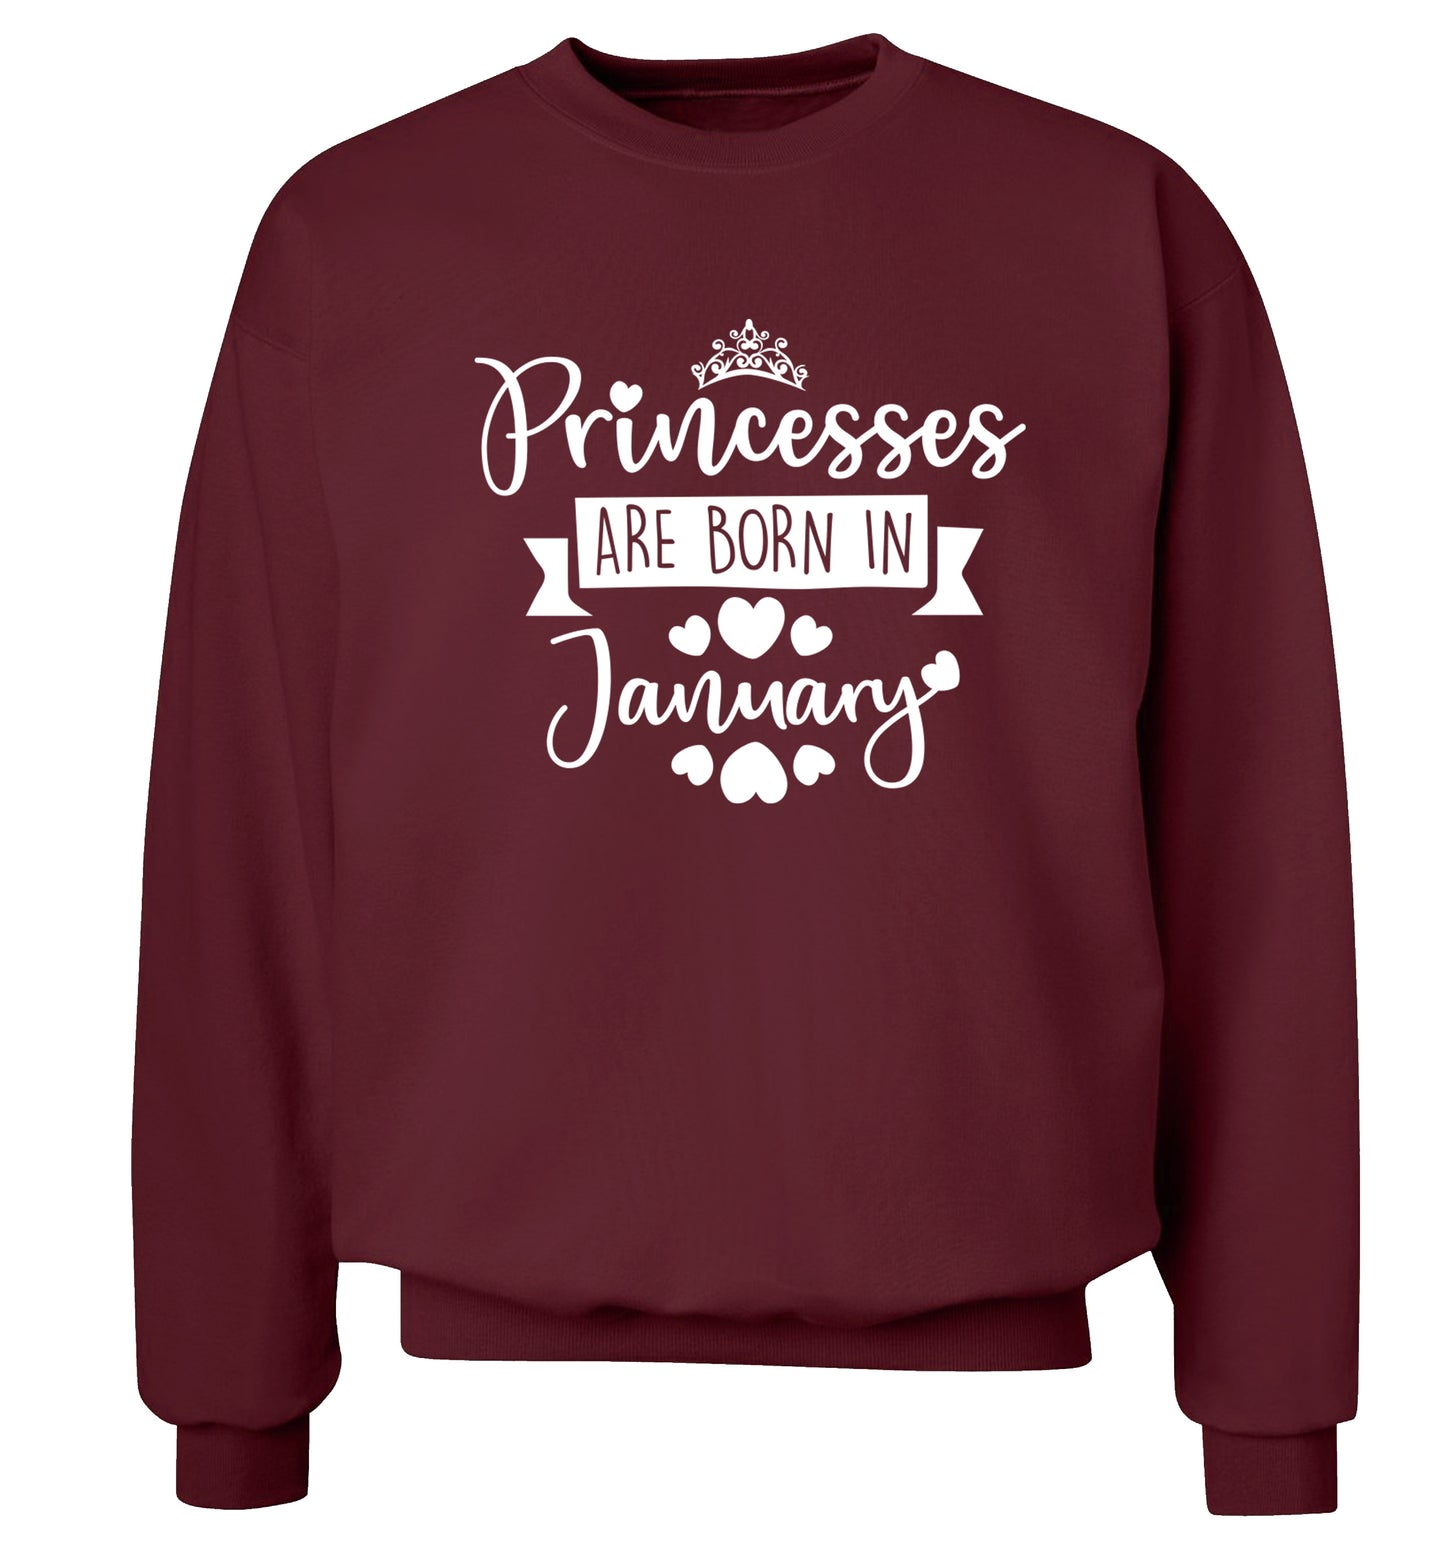 Princesses are born in November Adult's unisex maroon Sweater 2XL